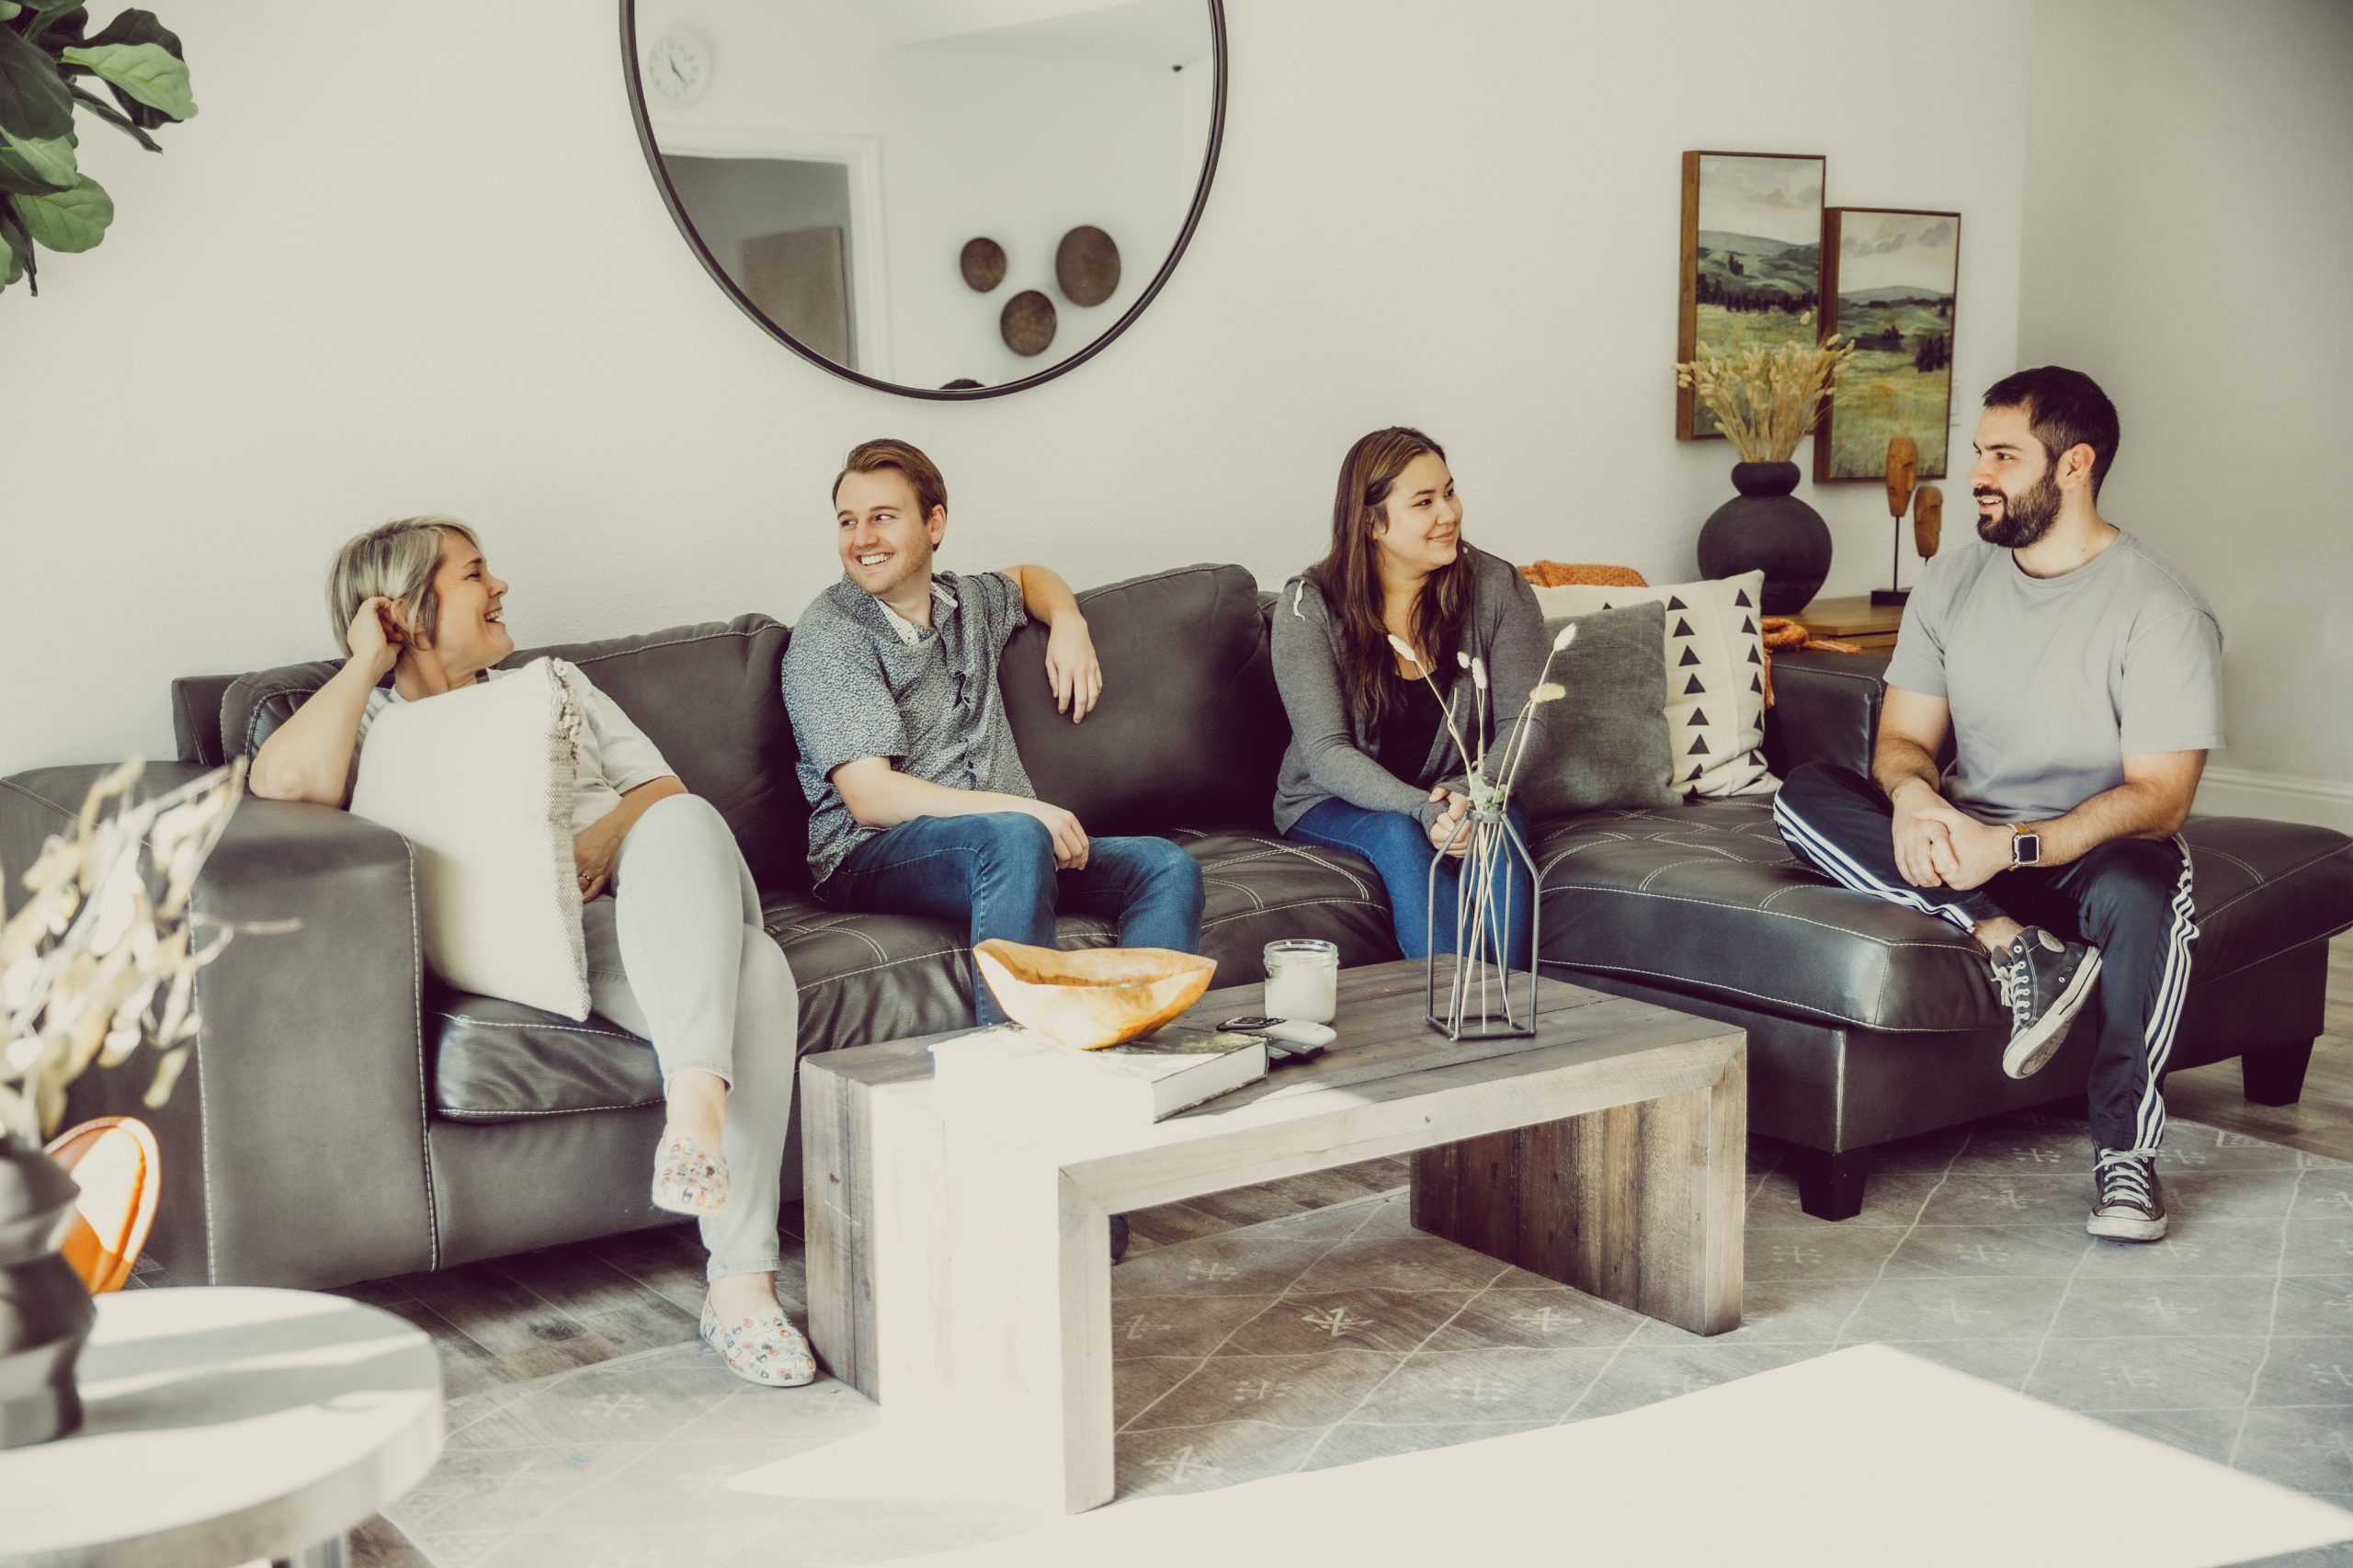 Four people having an upbeat conversation on a couch